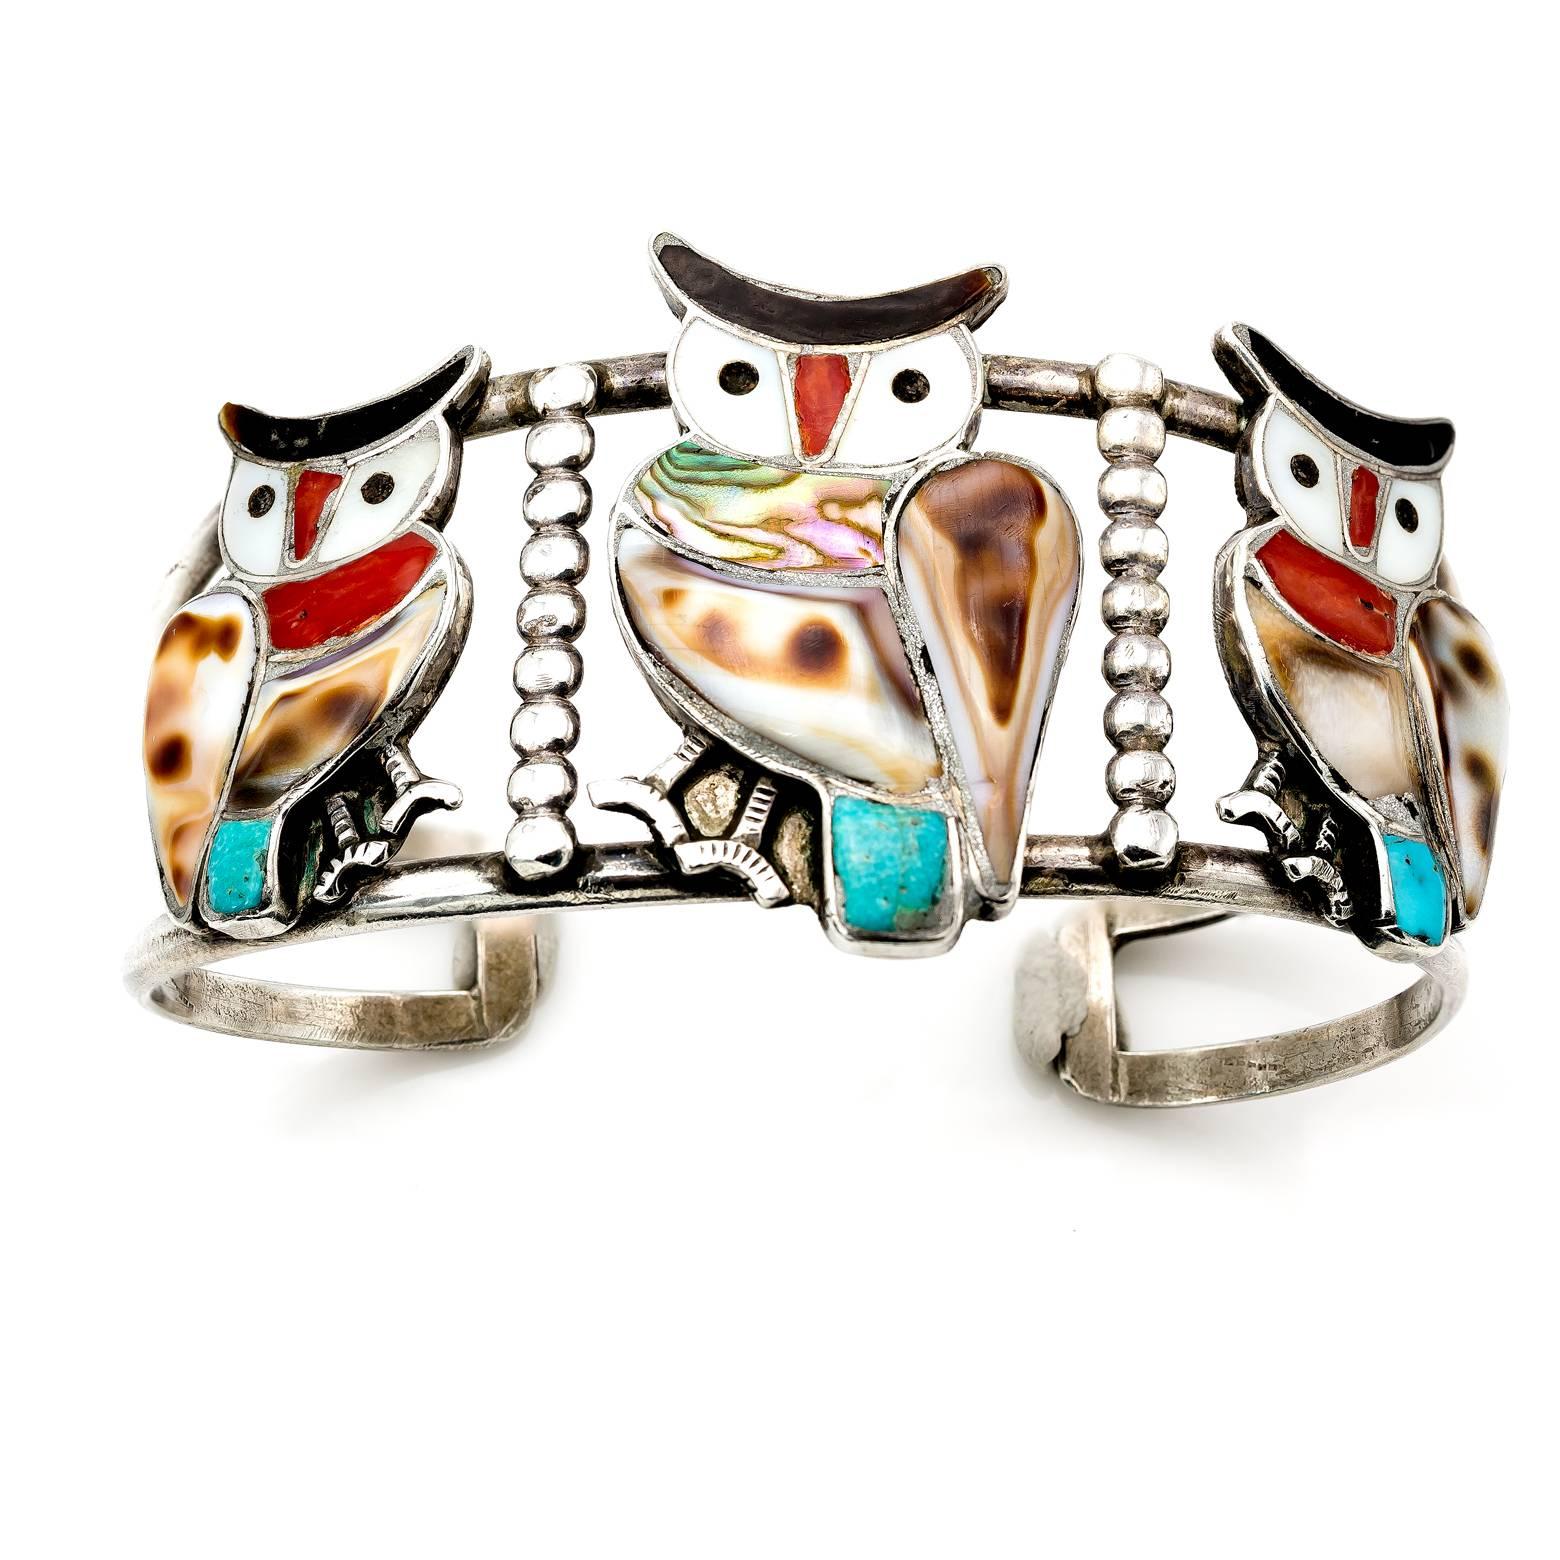 This vintage Zuni bracelet is stunning and spectacular with three owls perched next to teach other decked out in mother of pearl, abalone, shell and turquoise. A great collectors item, check out our 1st Dibs store for more Zuni items. 